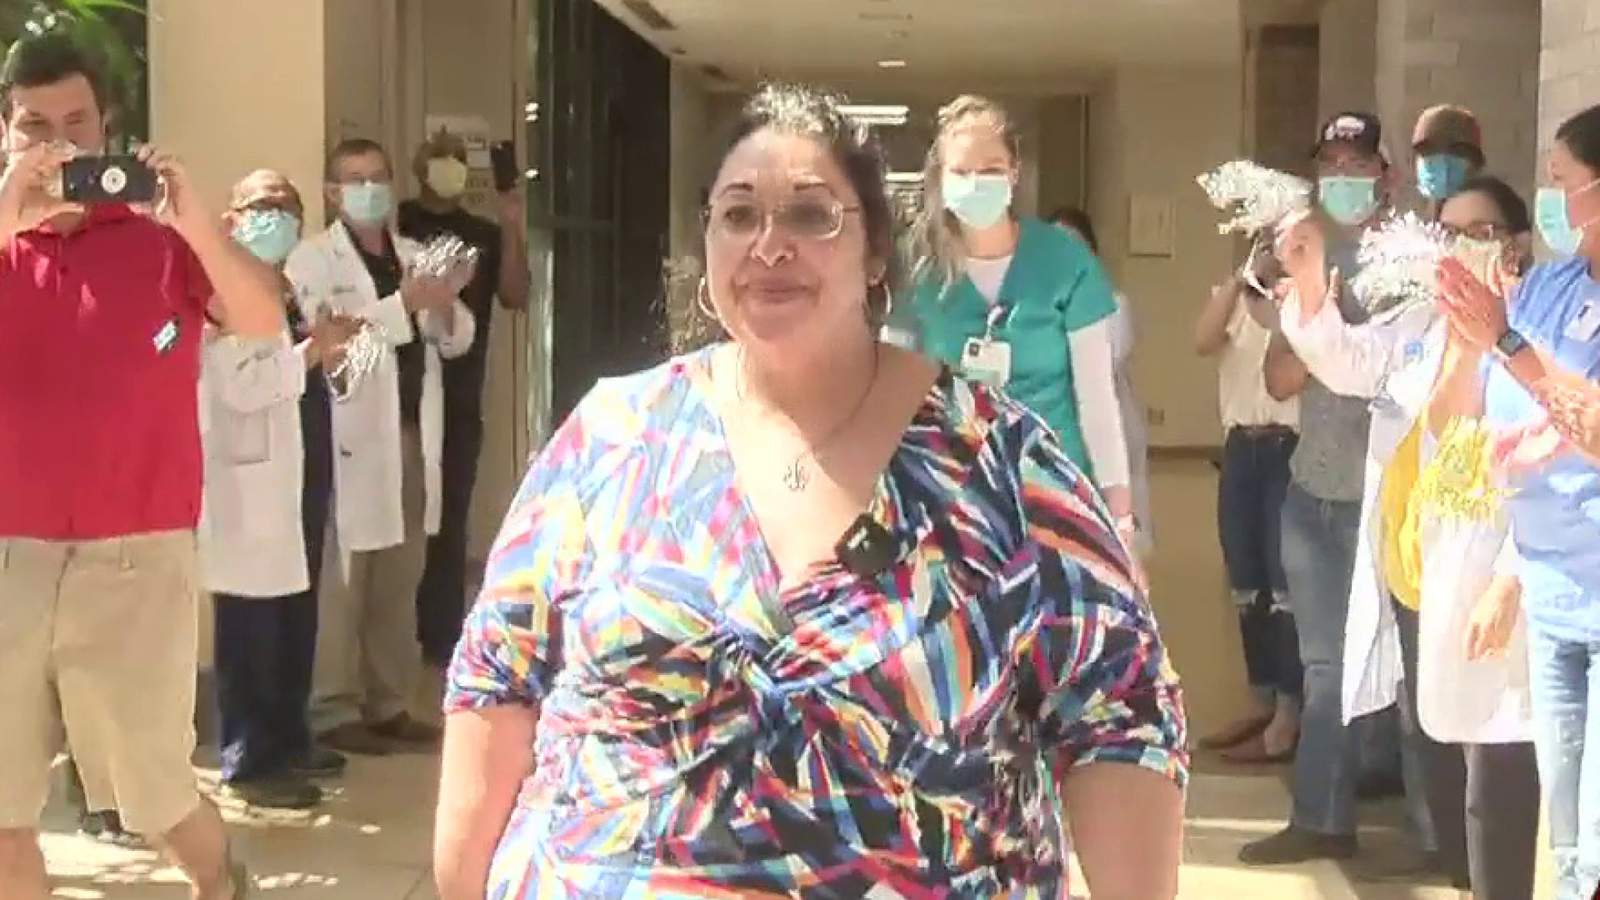 Discharged ‘miracle’ patient greeted by cheers, applause